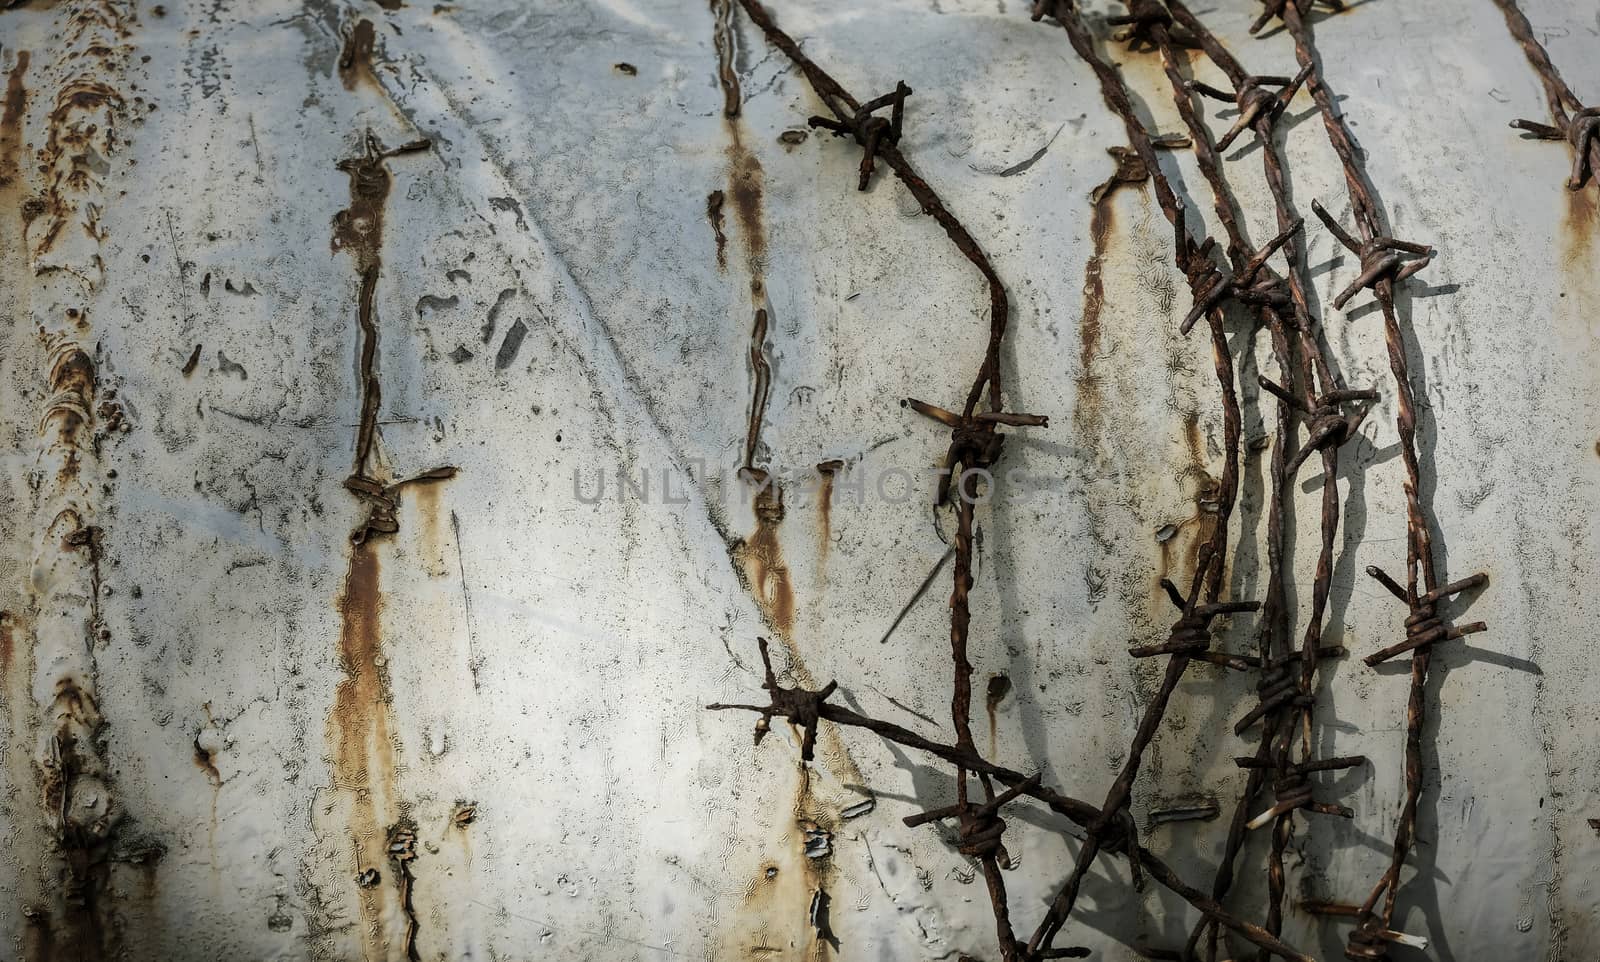 Barbed wire on grunge metal background